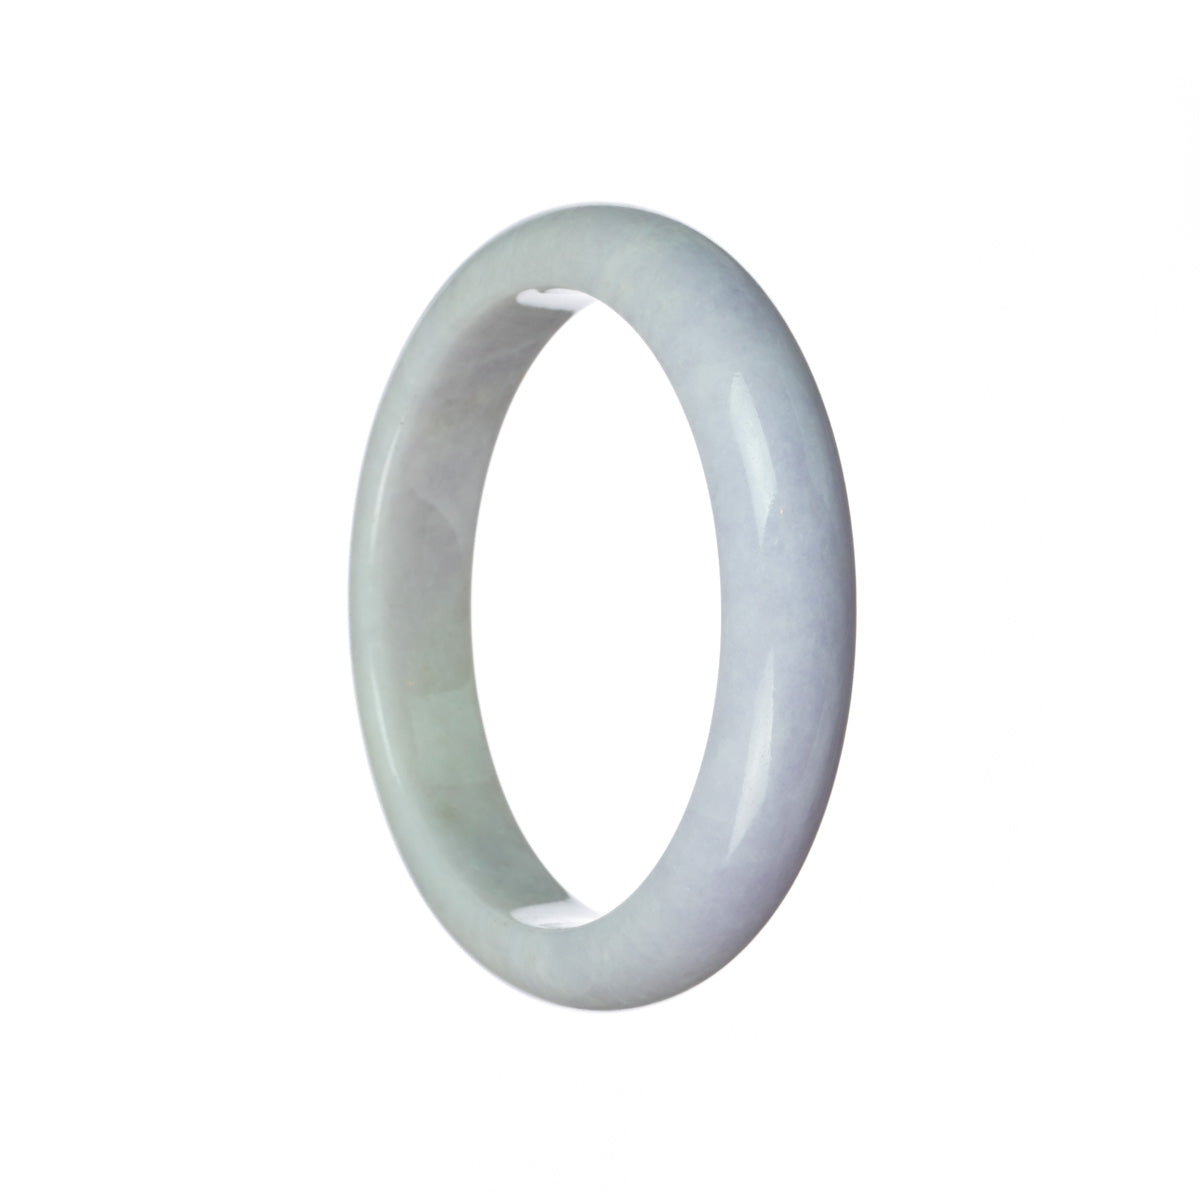 A close-up image of a lavender Burmese jade bangle with a half moon shape, measuring 60mm in diameter. The bangle has a genuine Type A certification and is from MAYS™.